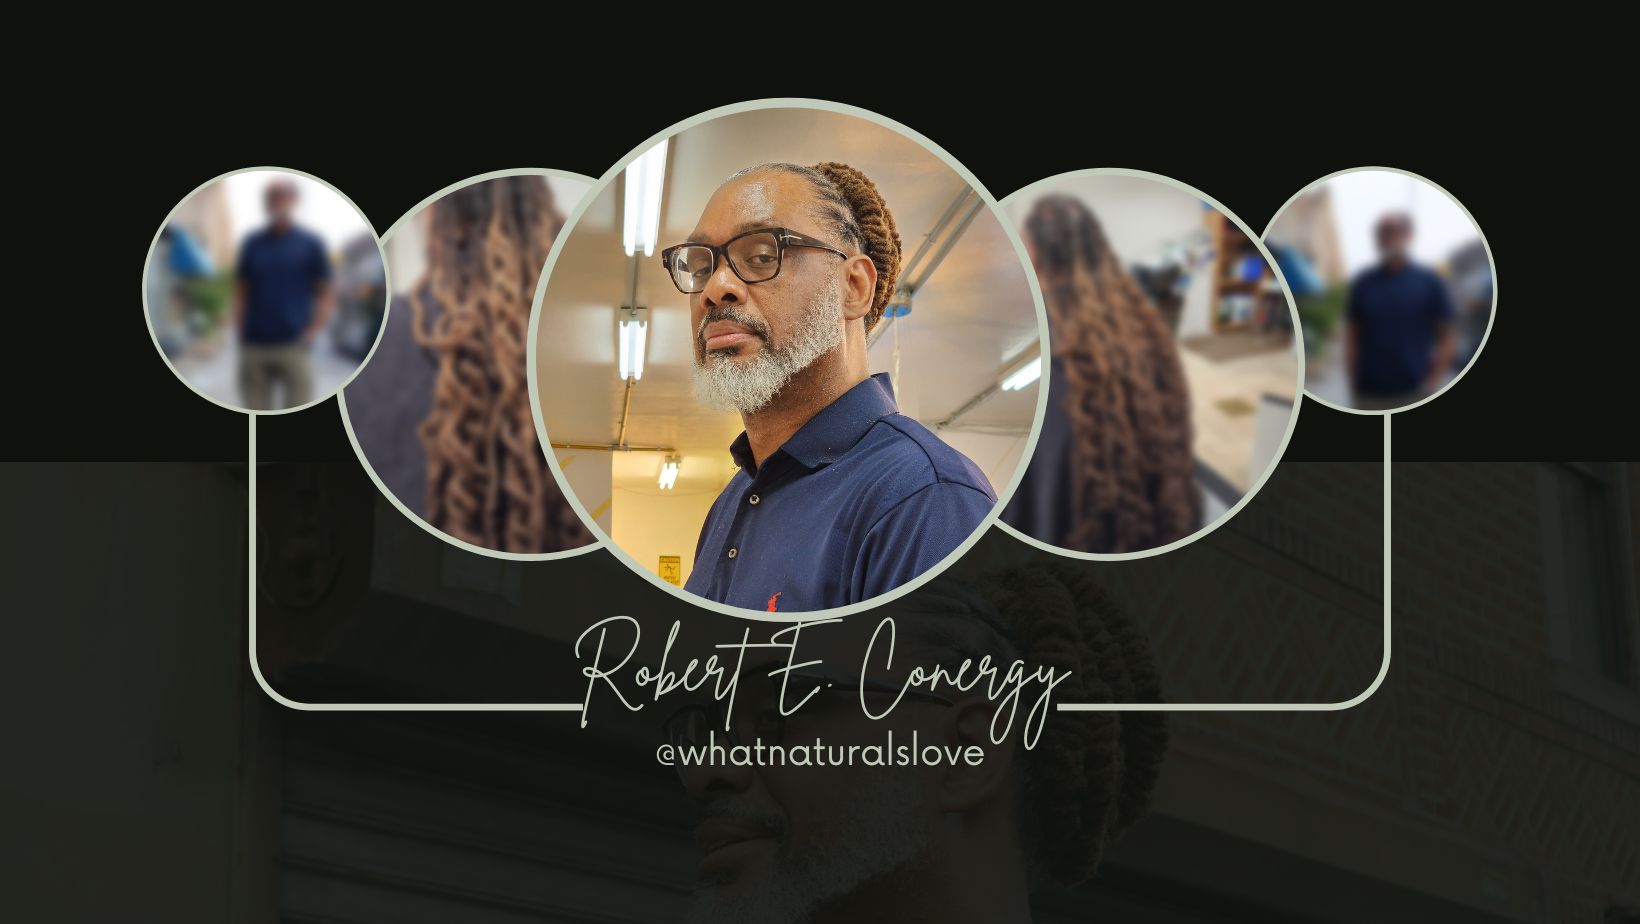 Did Jesus have Locs? Former Council Member, Robert E. Conergy Discusses Locs and Religion